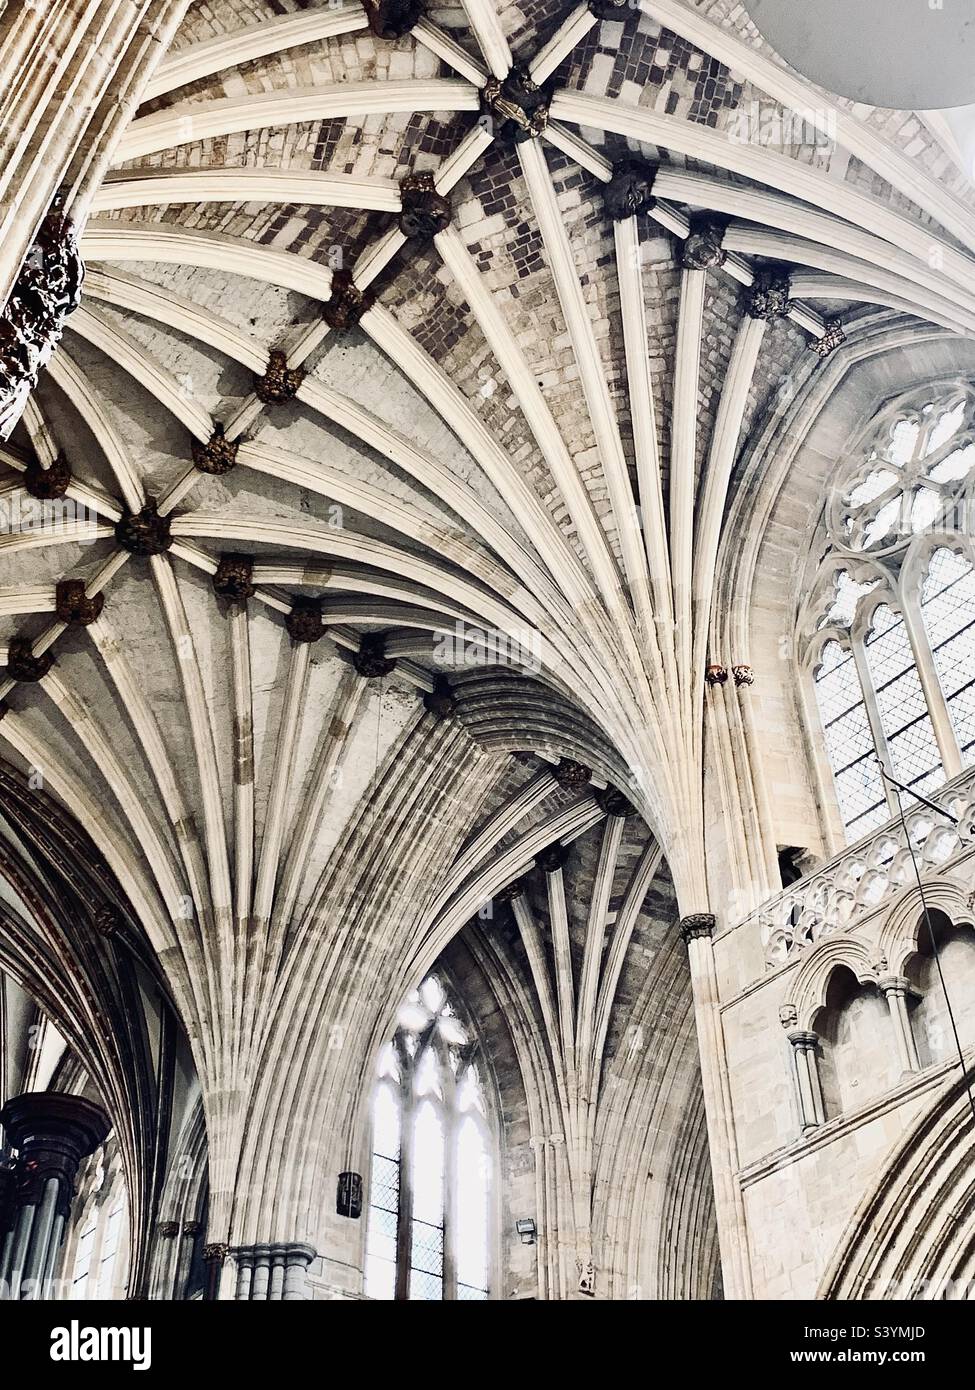 Amazing details of the architectural beauty of the interior roof and ceiling of the carved pillars of Exeter cathedral, England Stock Photo